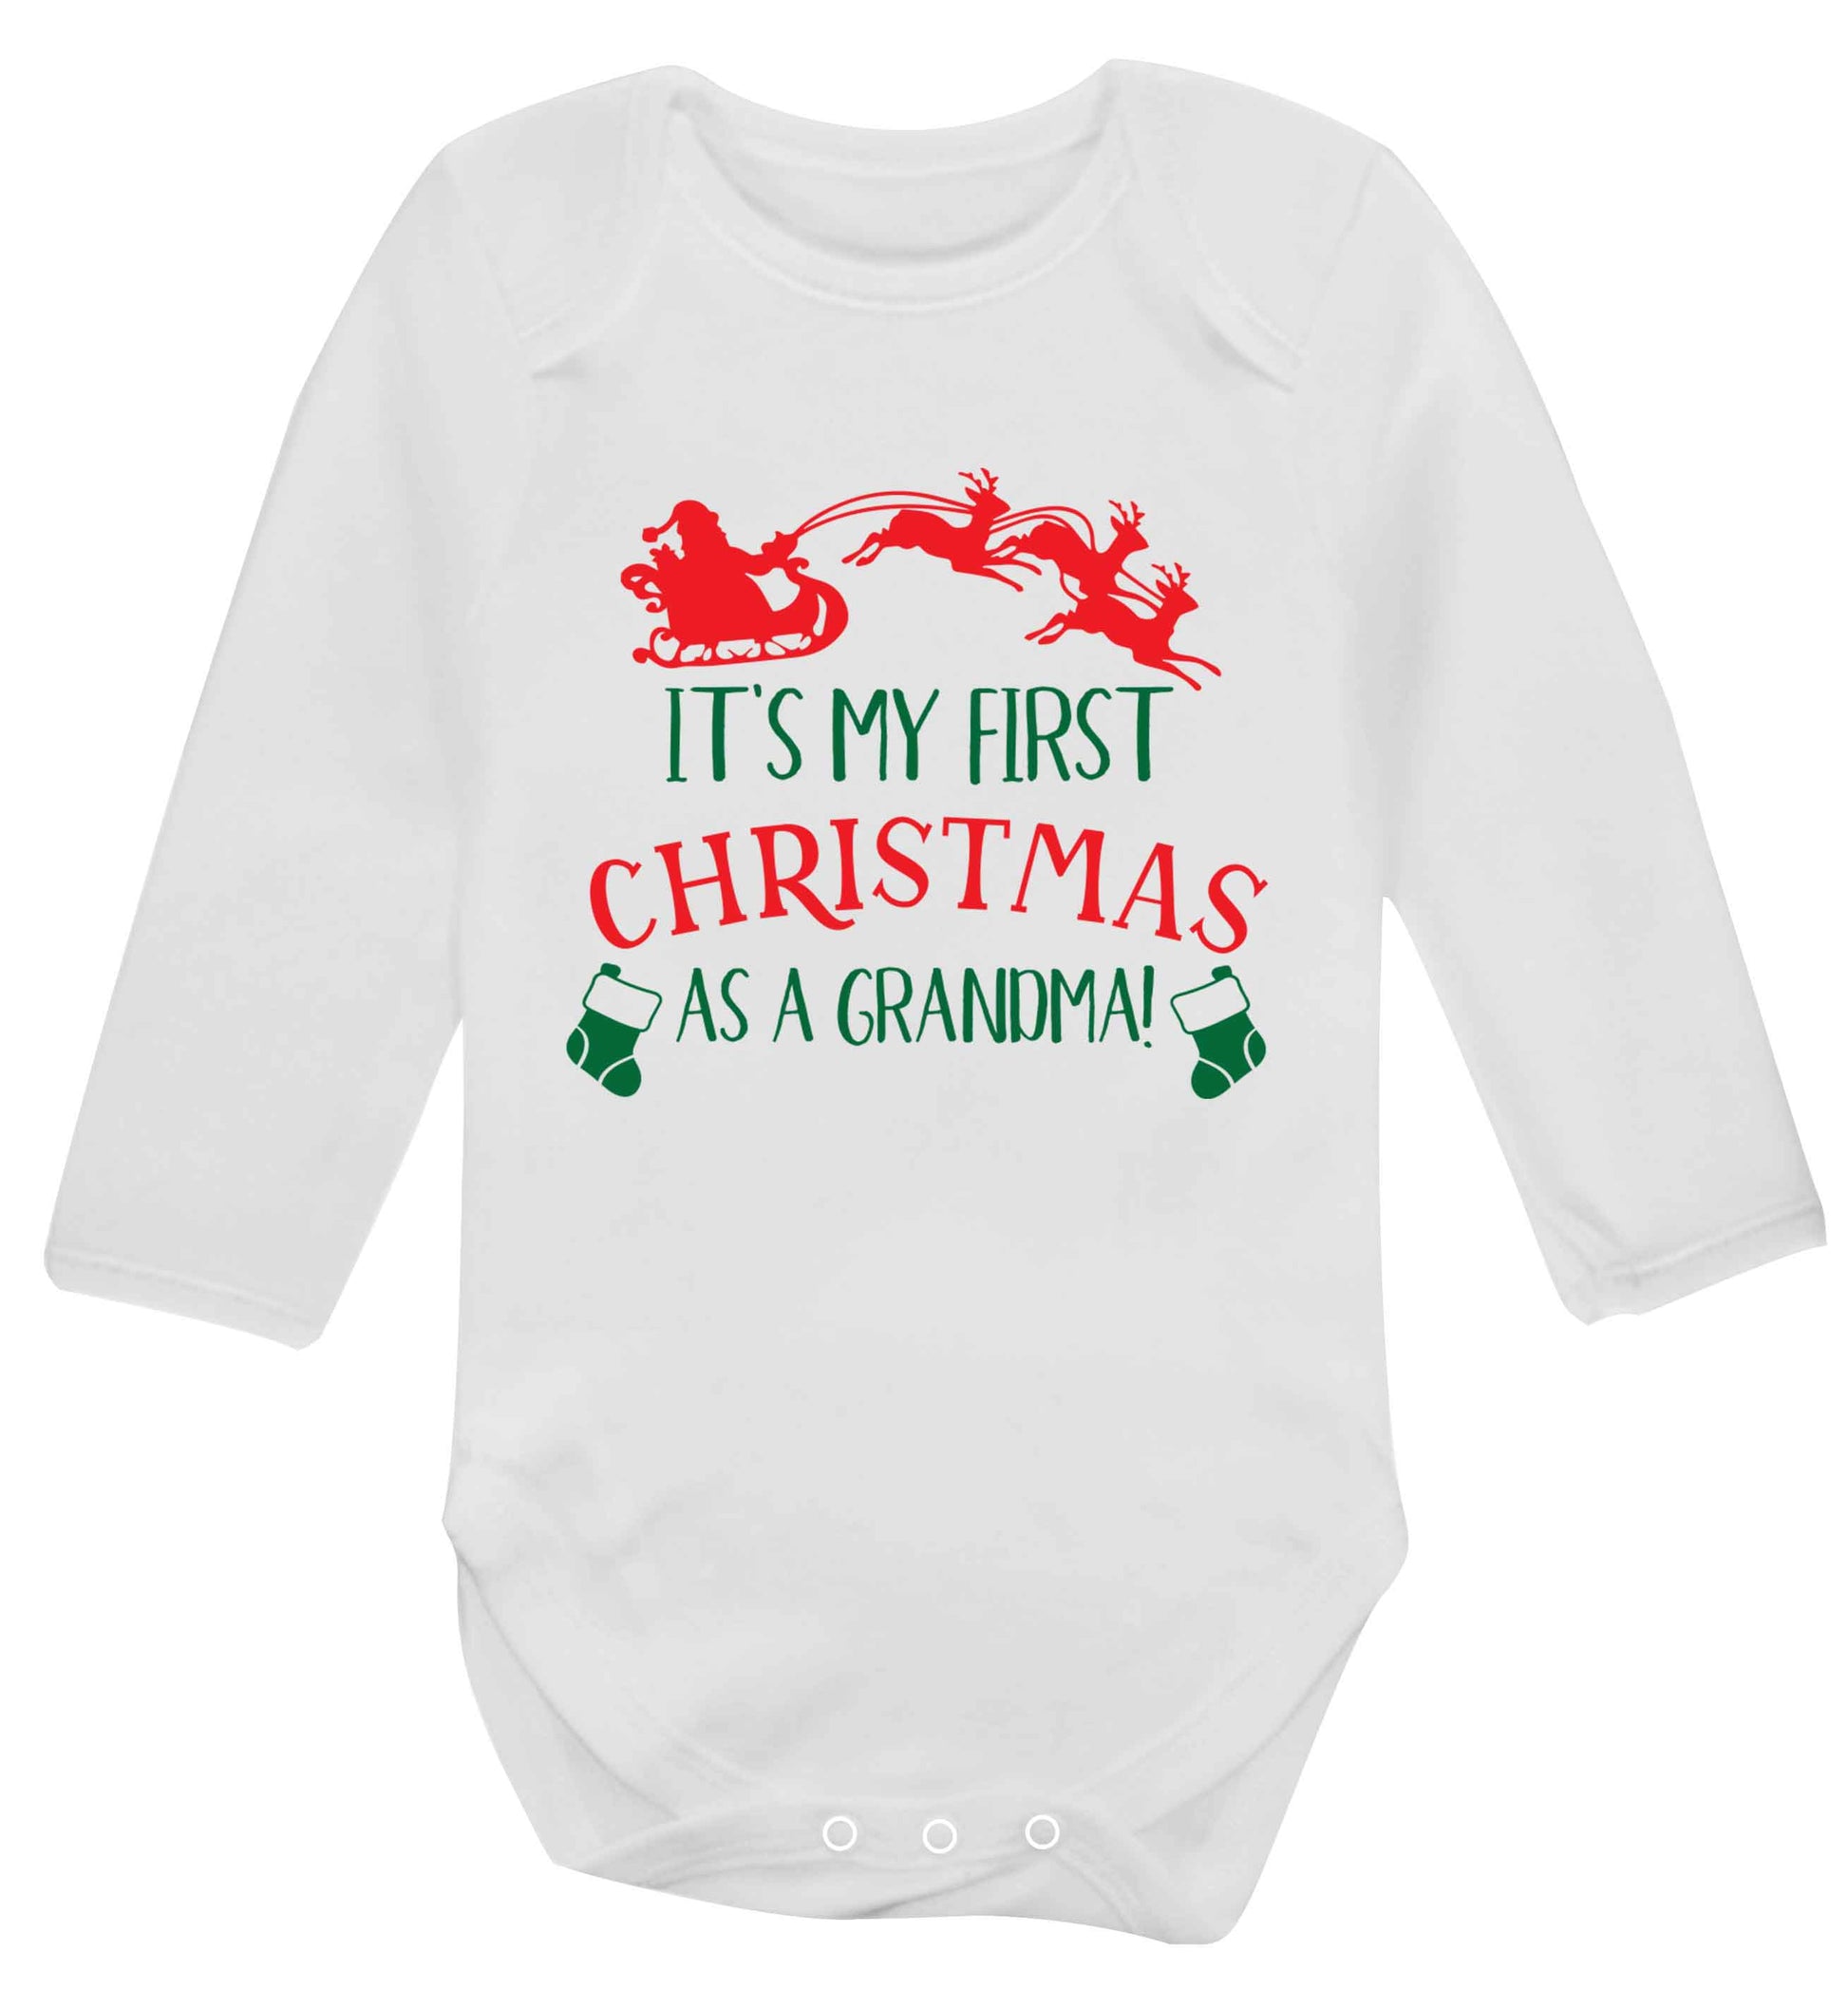 It's my first Christmas as a grandma! Baby Vest long sleeved white 6-12 months